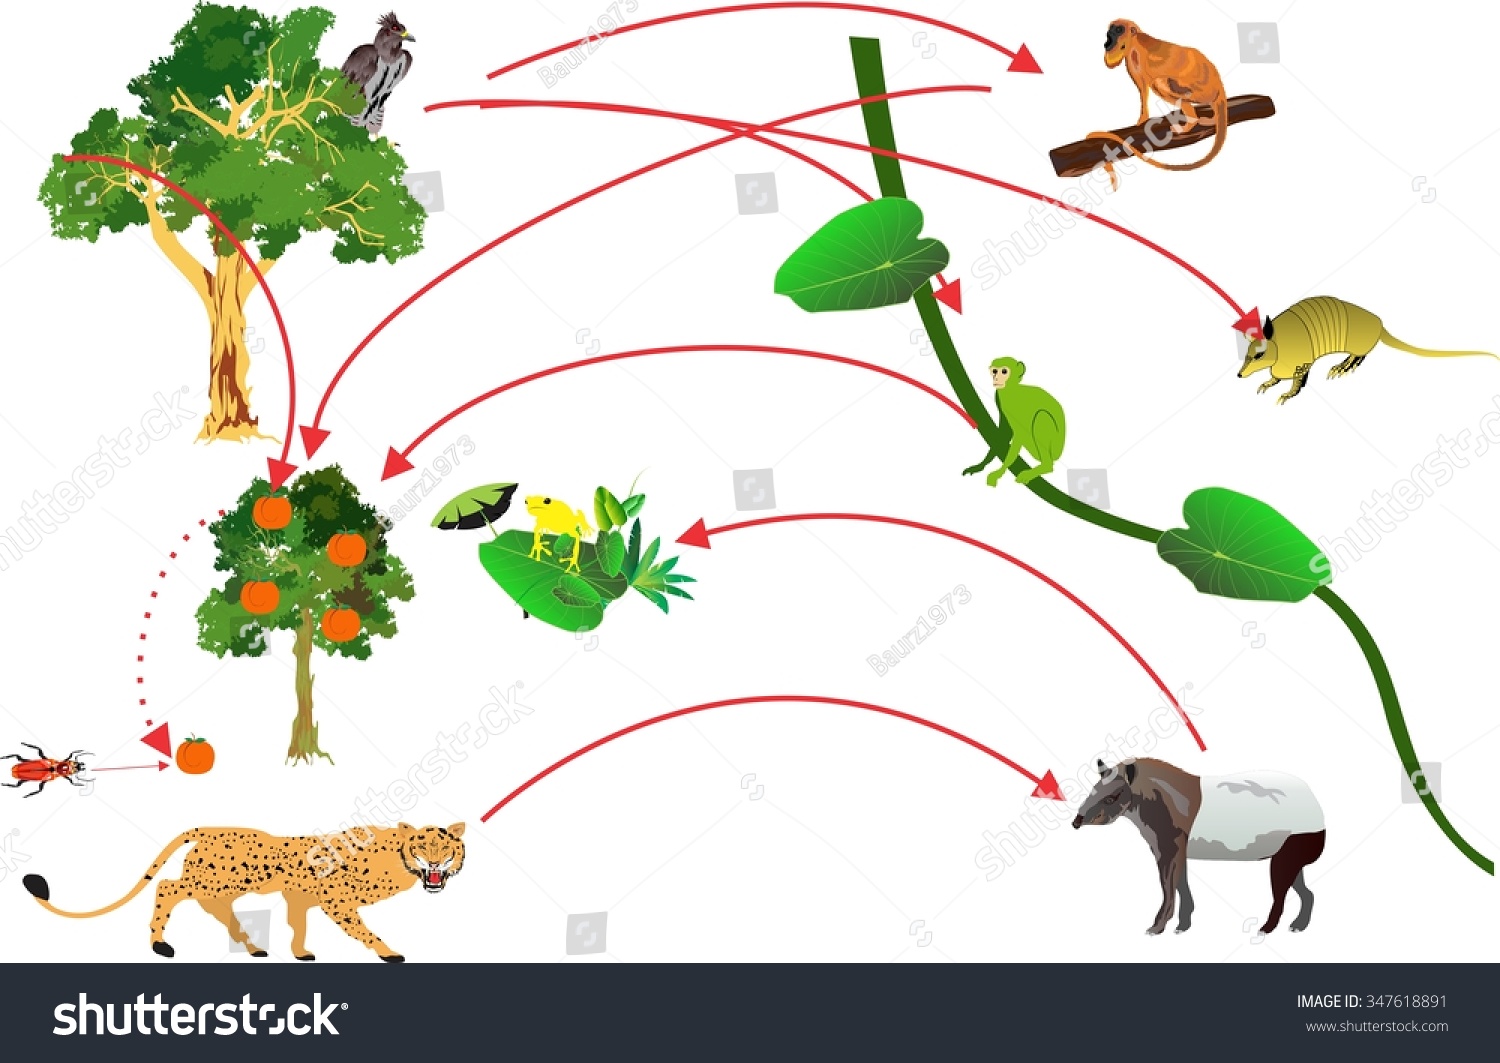 Amazon Rainforest Food Chain Life Crcle Stock Vector Royalty Free